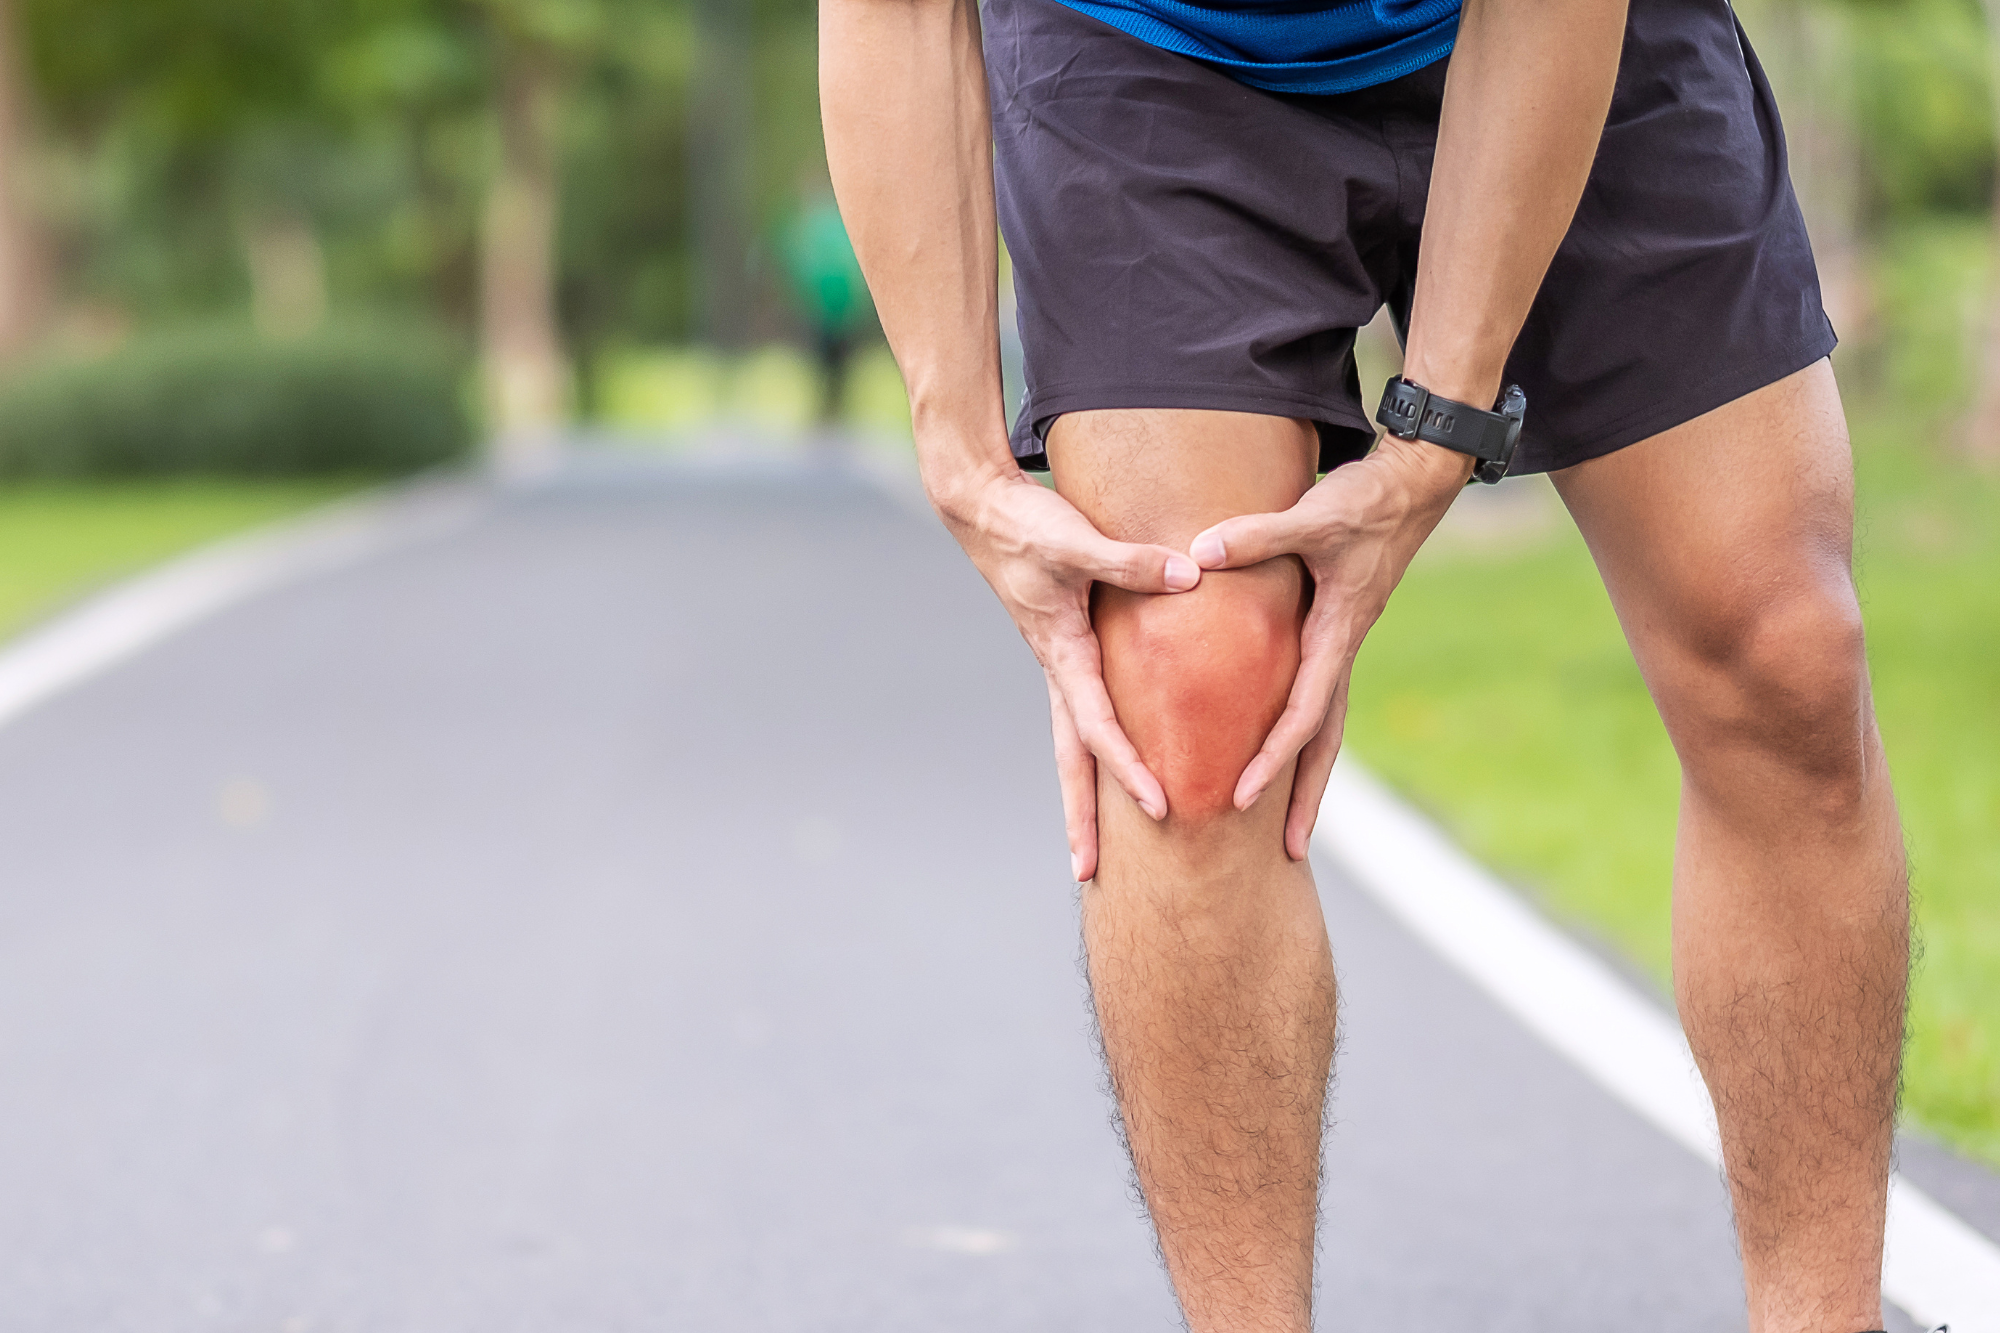 A runner on paved path holds his knee after feeling a sharp pain, wondering, “Does a meniscus tear need surgery?”